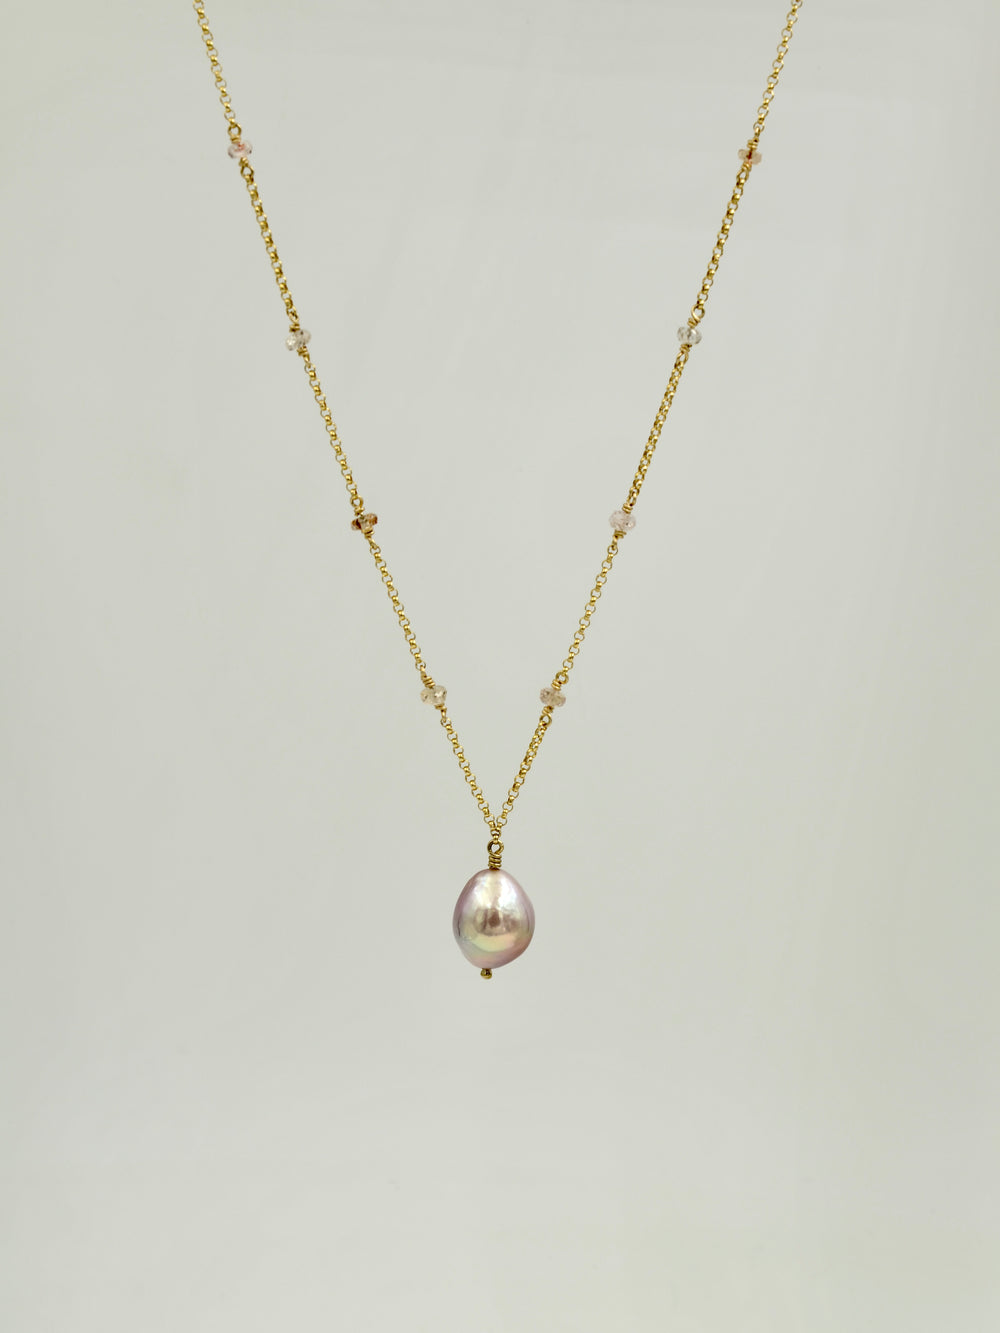 Pink Baroque Pearl Necklace with Imperial Topaz accents.